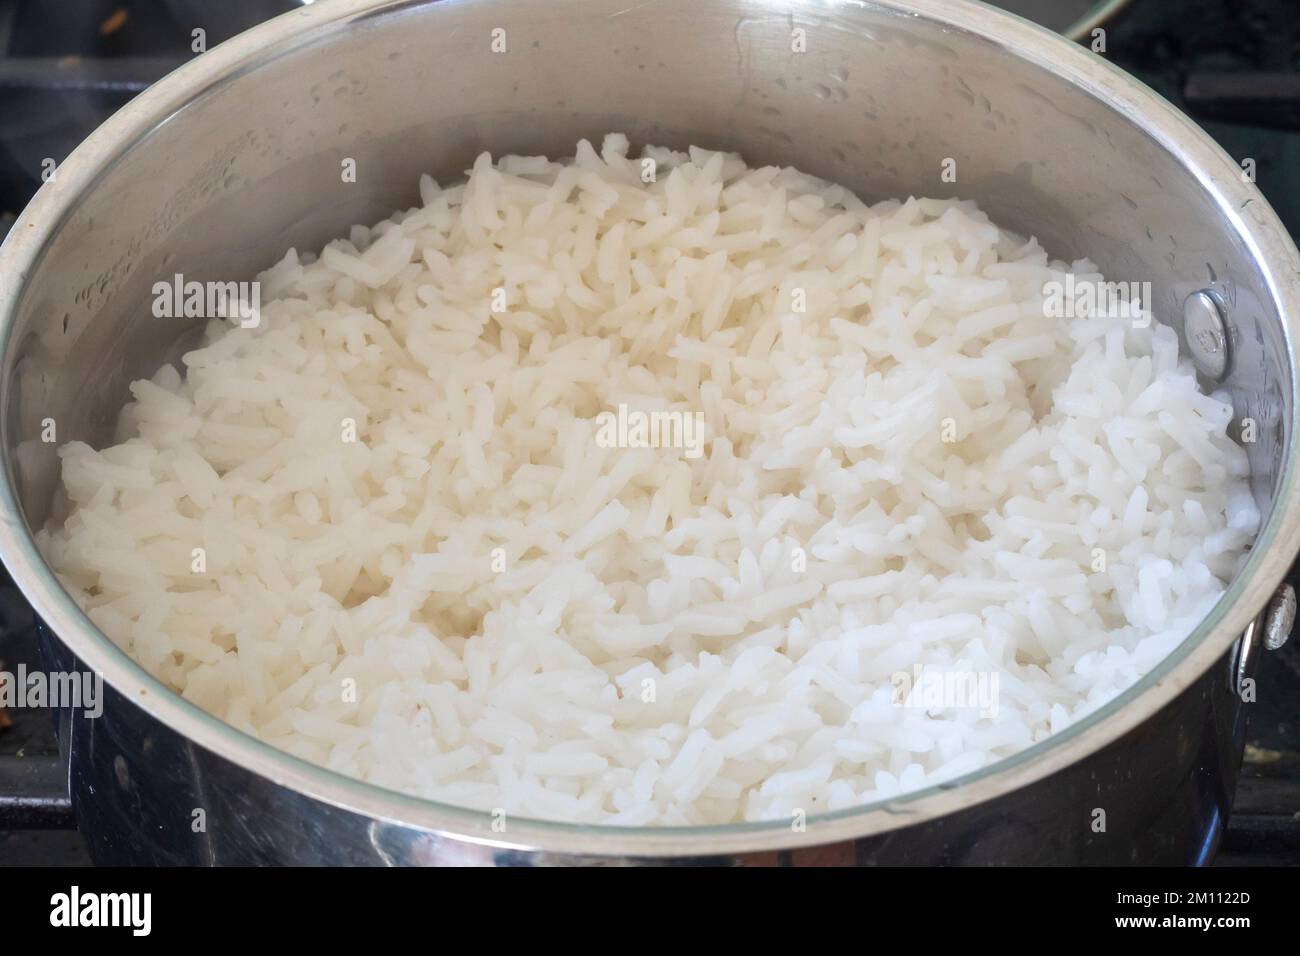 Cooking steamed rice in a saucepan Stock Photo